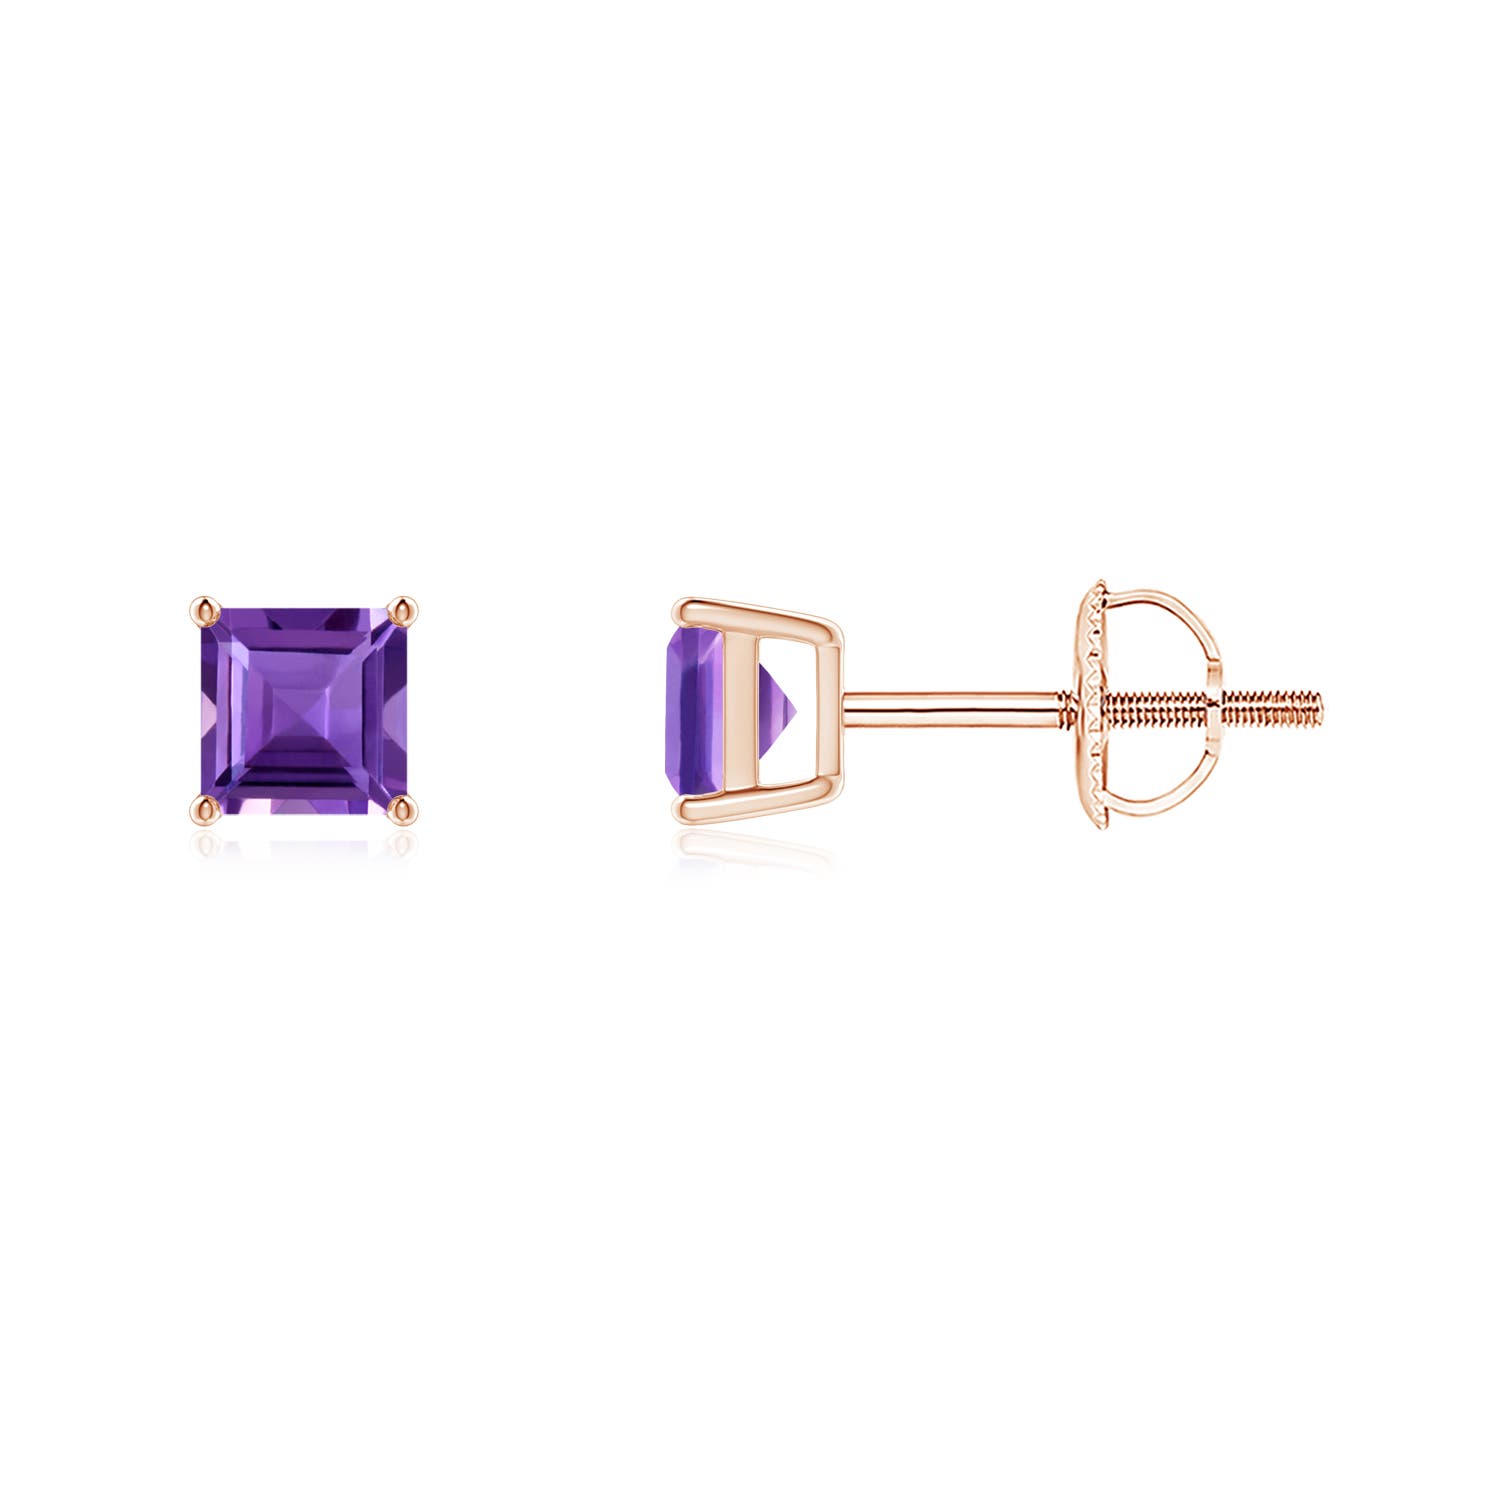 AAA - Amethyst / 0.66 CT / 14 KT Rose Gold